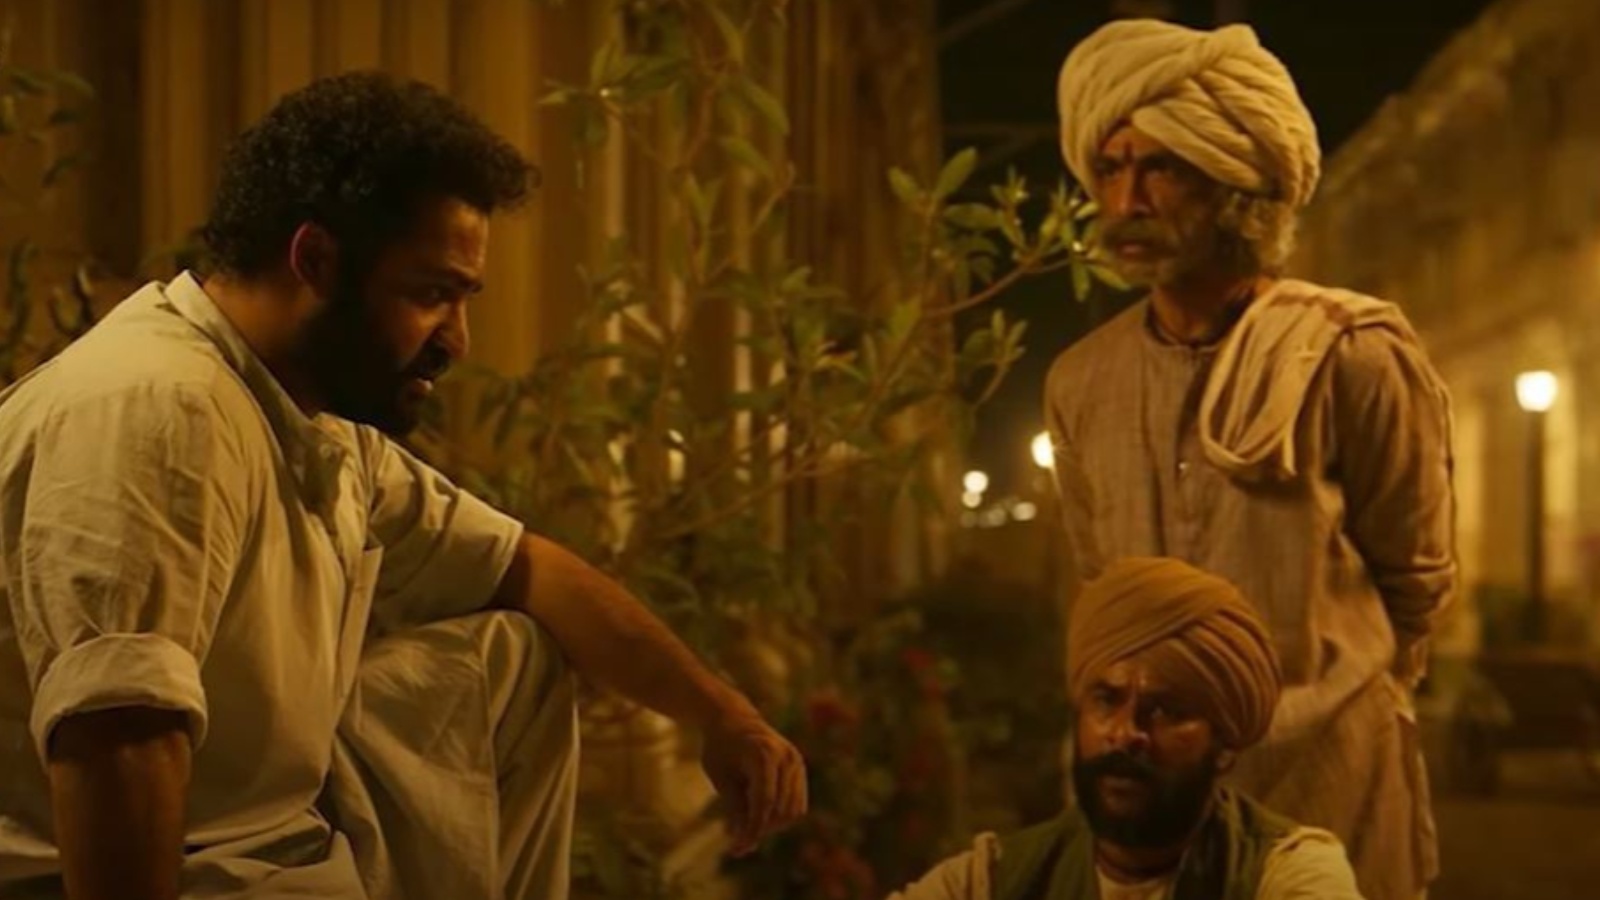 android, satya fan ram charan personally welcomed makarand deshpande to rrr set, veteran actor says his scenes were cut due to date issues